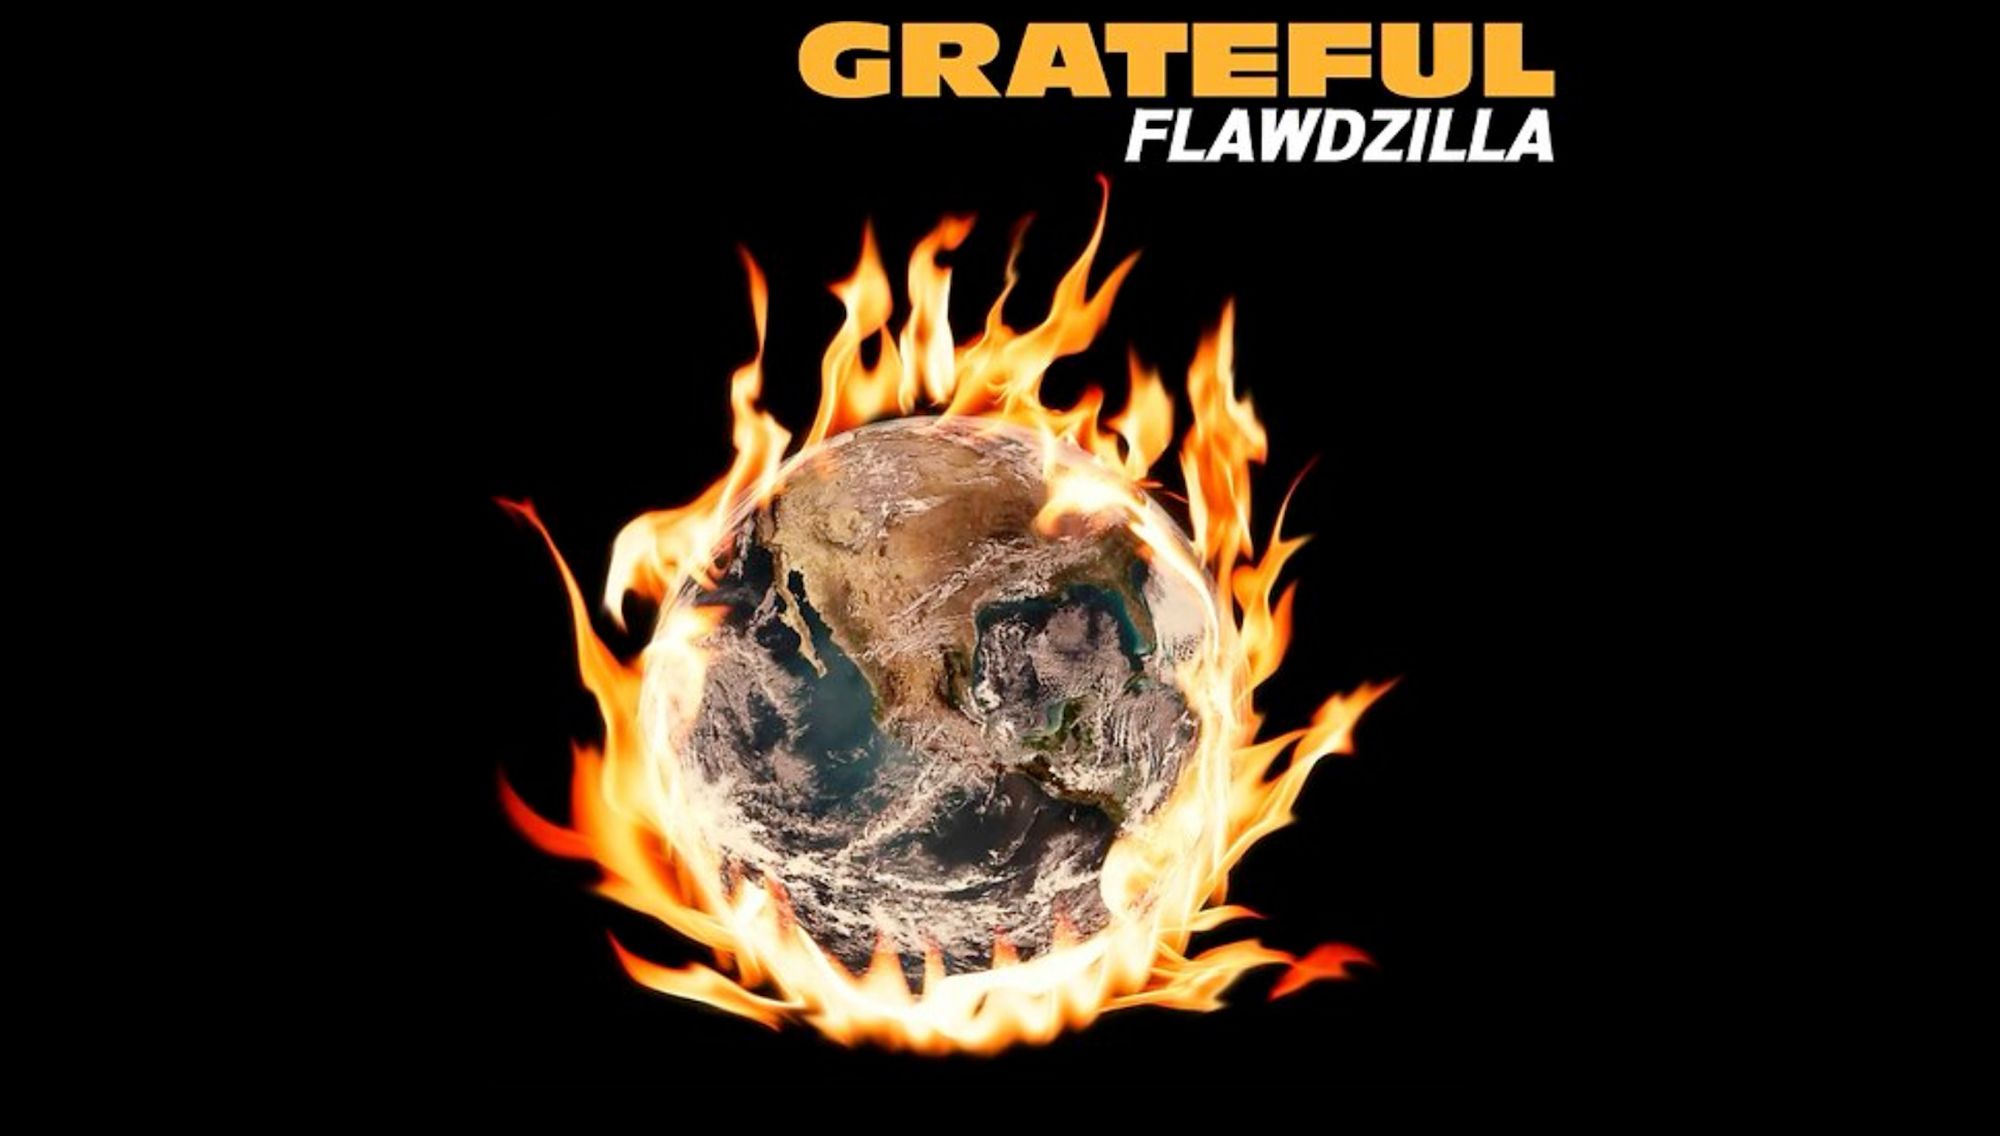 On Normal World, Flawdzilla Proves To Be Grateful For His Lot in Life